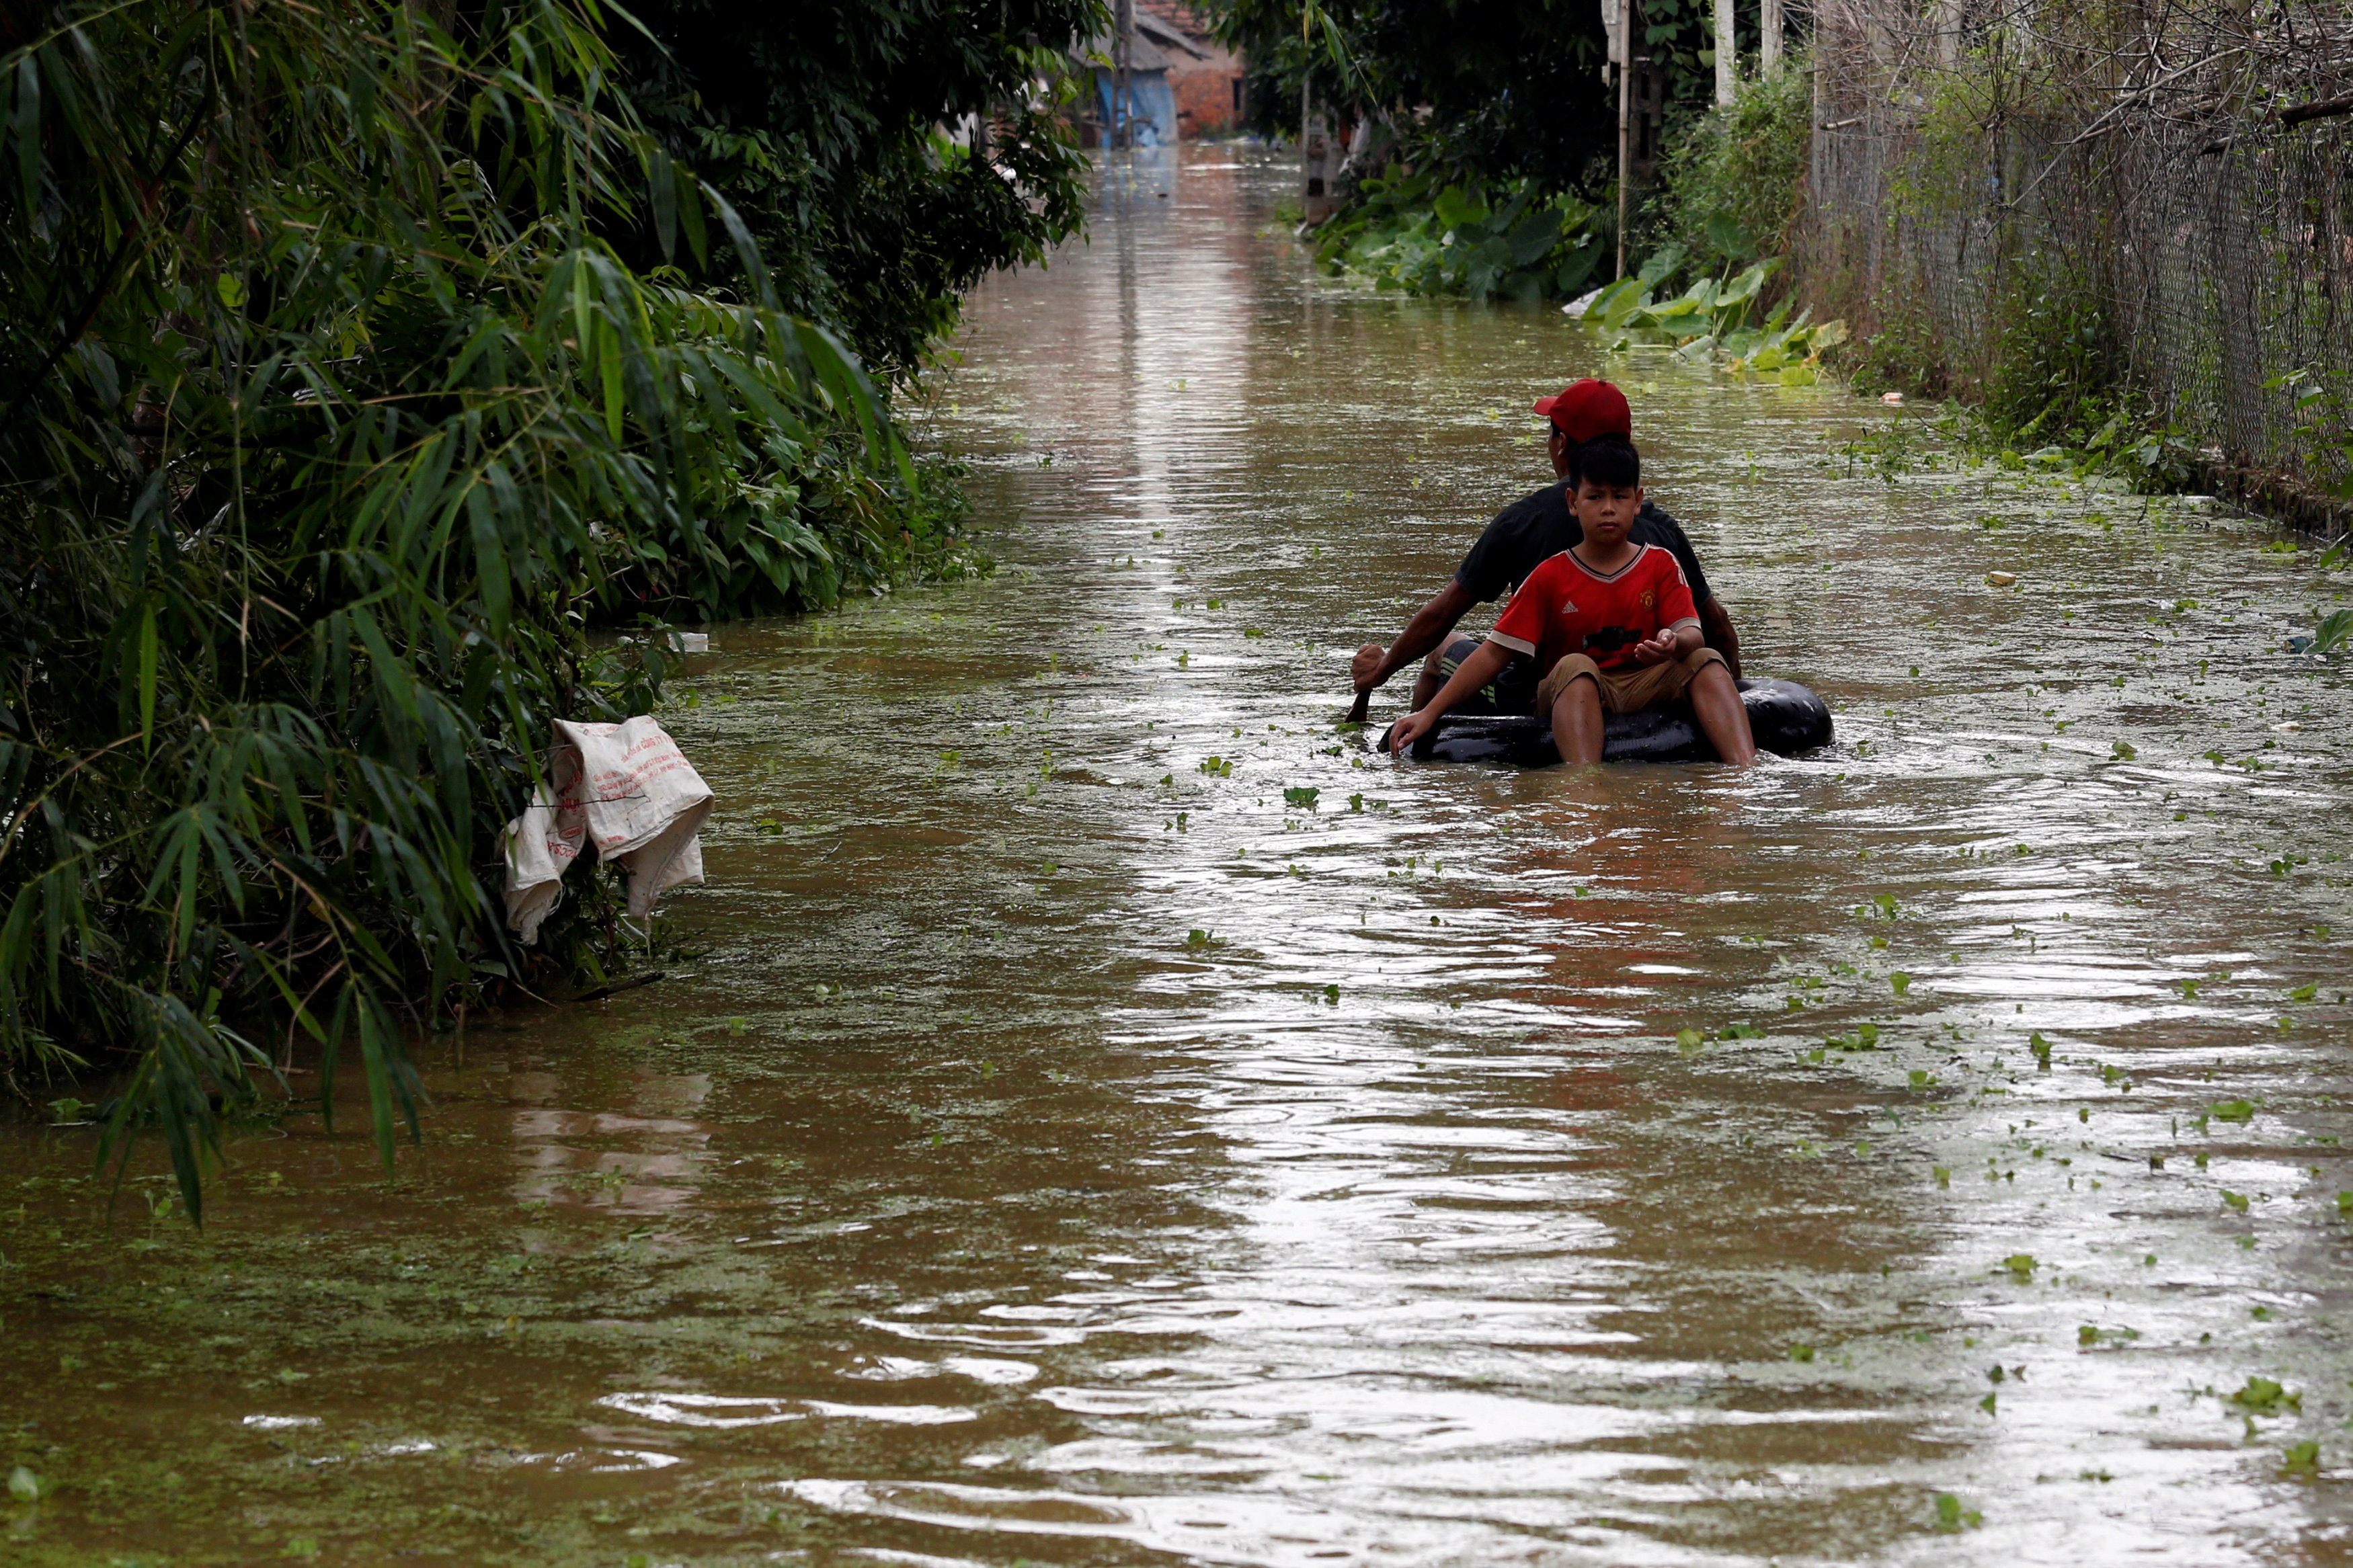 Boys paddle an improvised boat in a flooded village after a tropical depression in Hanoi, Vietnam October 13, 2017. Photo: Reuters